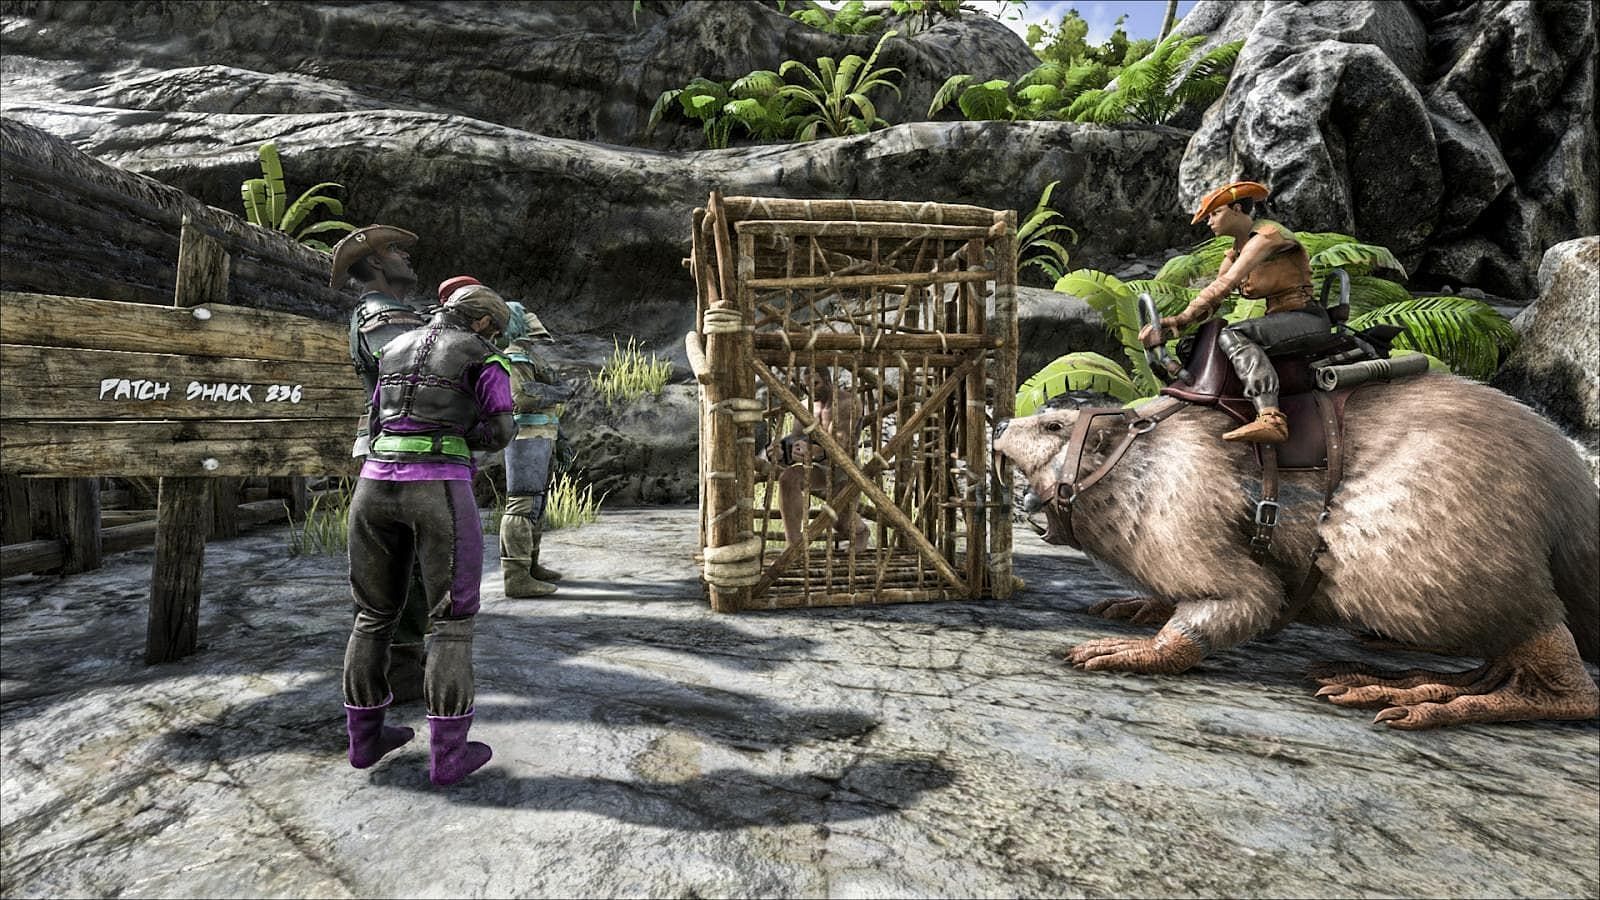 official spotlight of the casteroides creature in Ark Survival Ascended